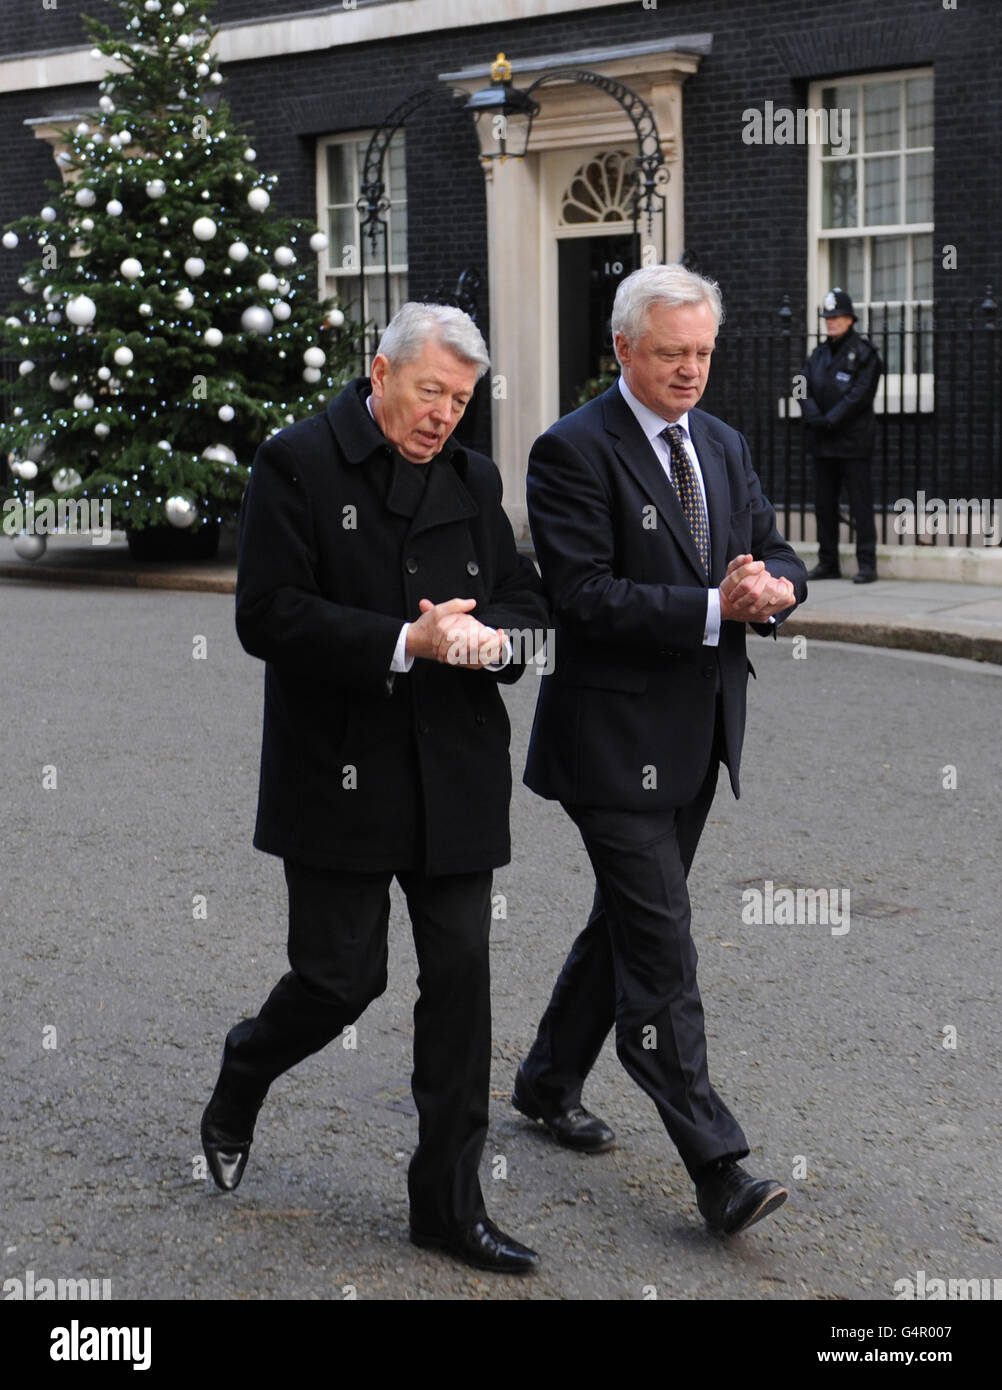 MPs Alan Johnson (left) and David Davis (right) after they handed a petition in at 10 Downing Street, London, with workers and family members from BAE Systems Brough factory in an attempt to halt the planned closure of the plant near Hull. PRESS ASSOCIATION Photo. Picture date: Wednesday December 14, 2011. See PA story INDUSTRY Lobby. Photo credit should read: Stefan Rousseau/PA Wire Stock Photo